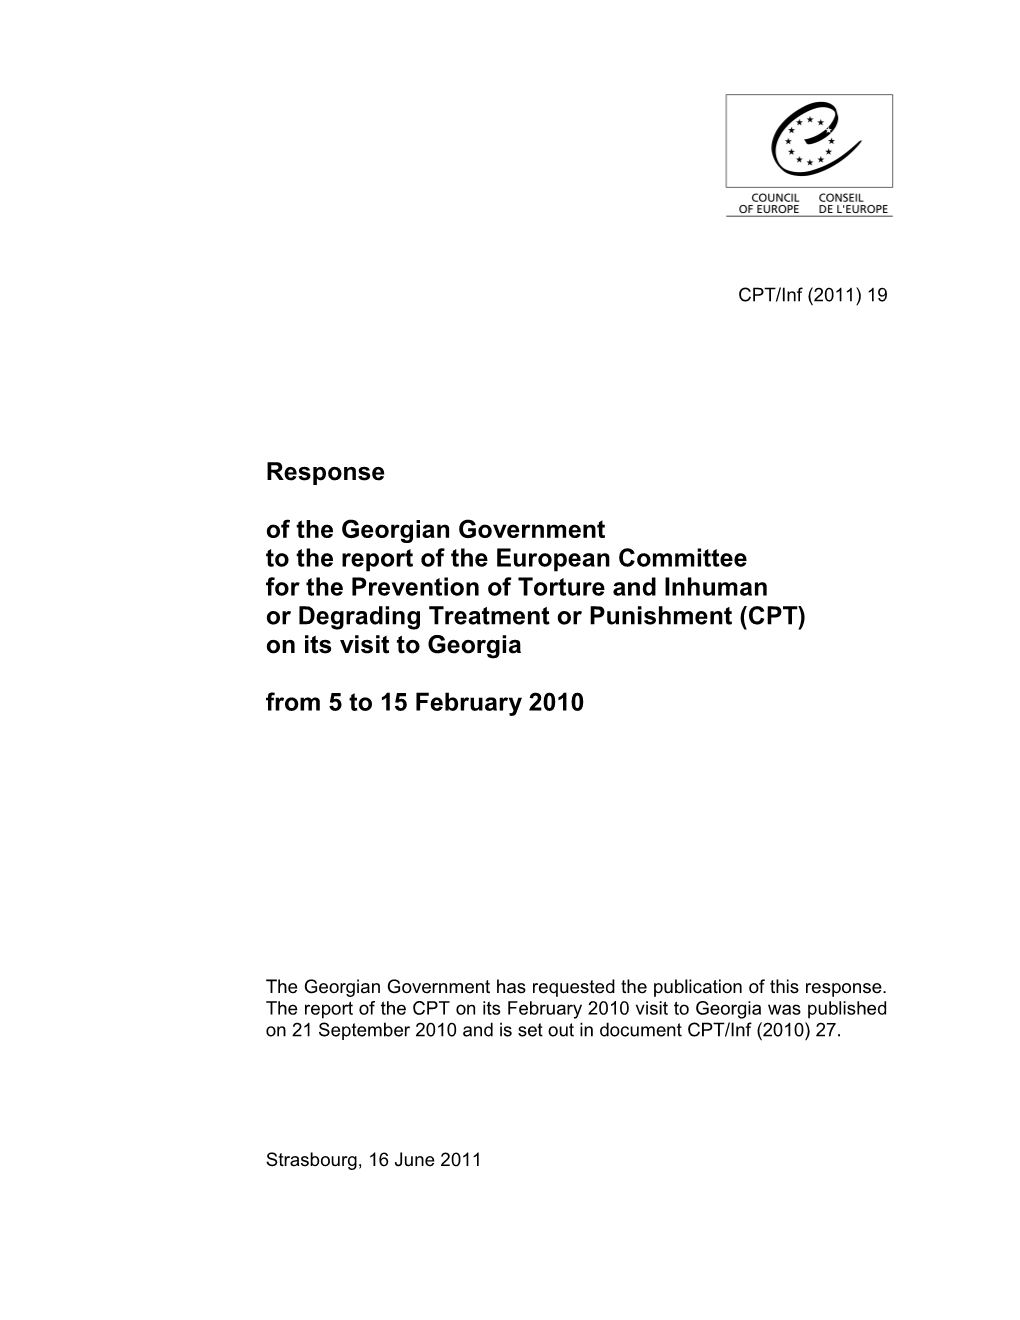 Response of the Georgian Government to the Report of The